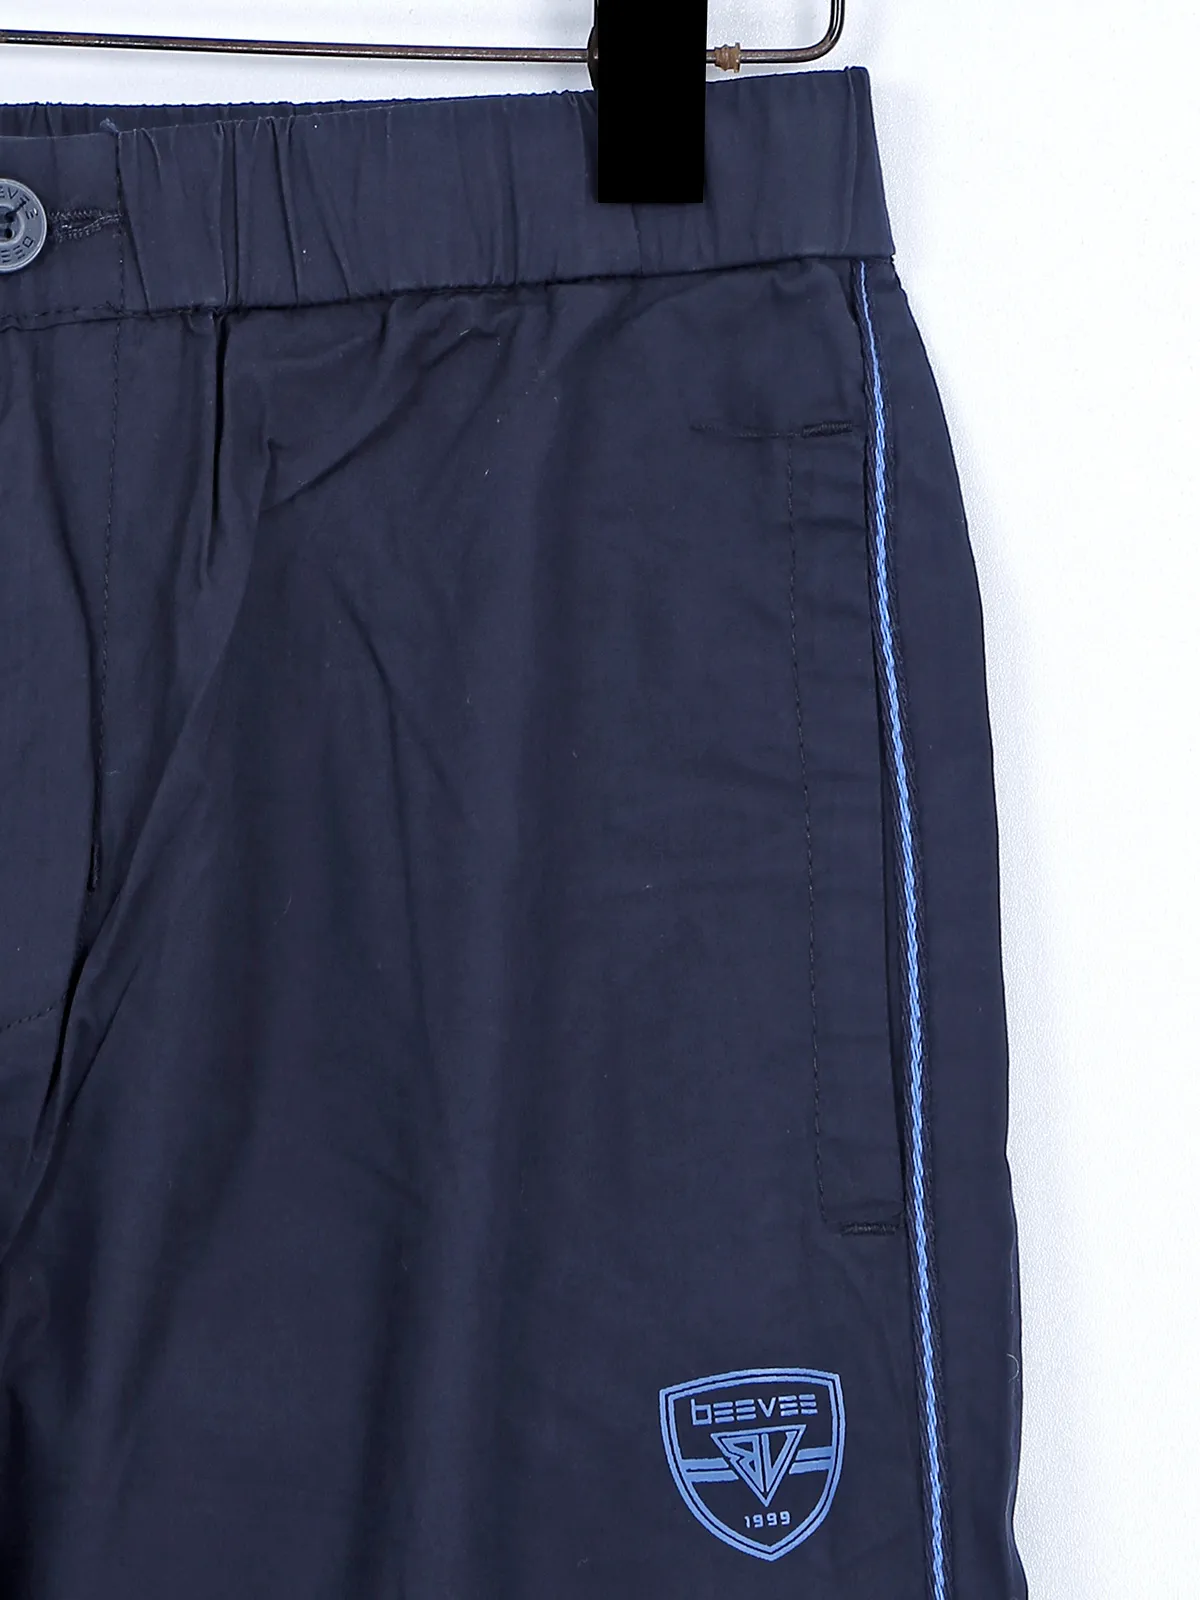 Beevee cotton navy track pant